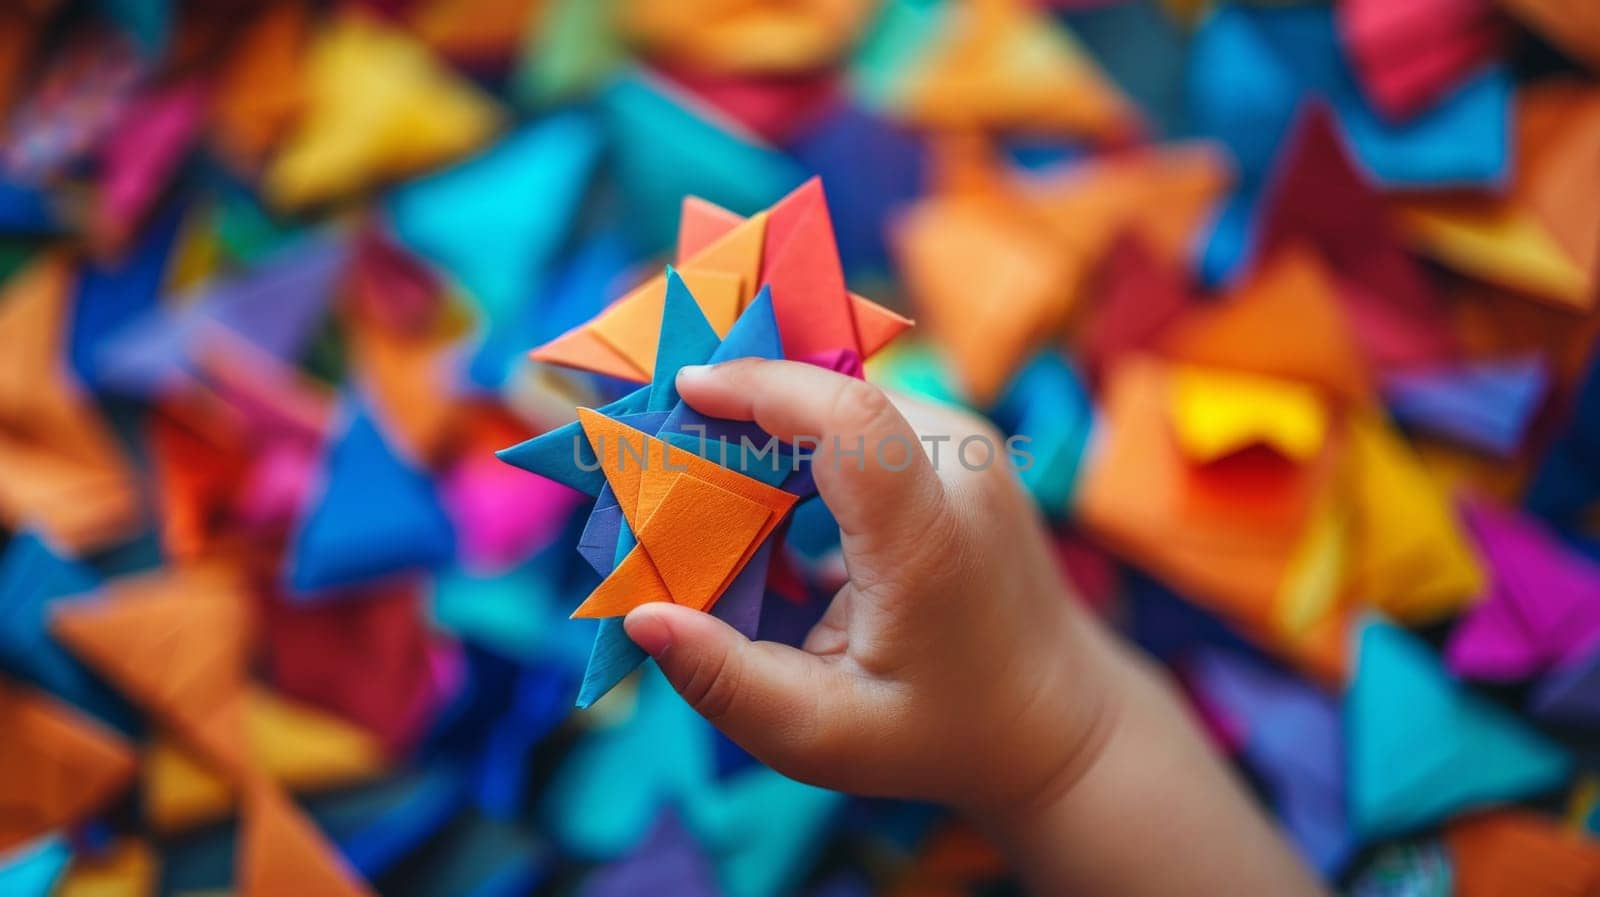 A child holding a small origami paper star in their hand